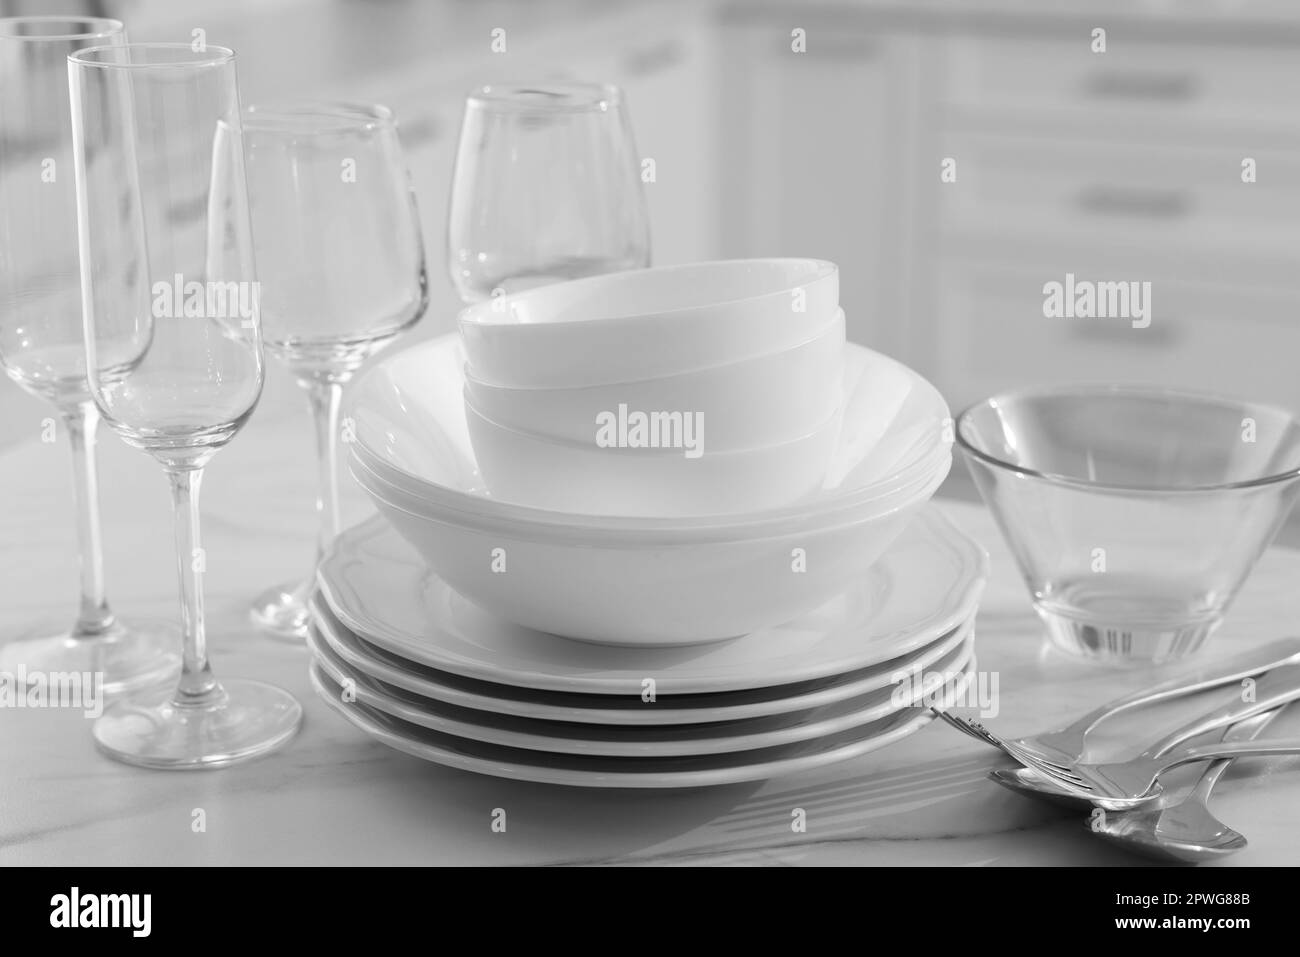 Different clean dishware, cutlery and glasses on white marble table in kitchen, closeup Stock Photo